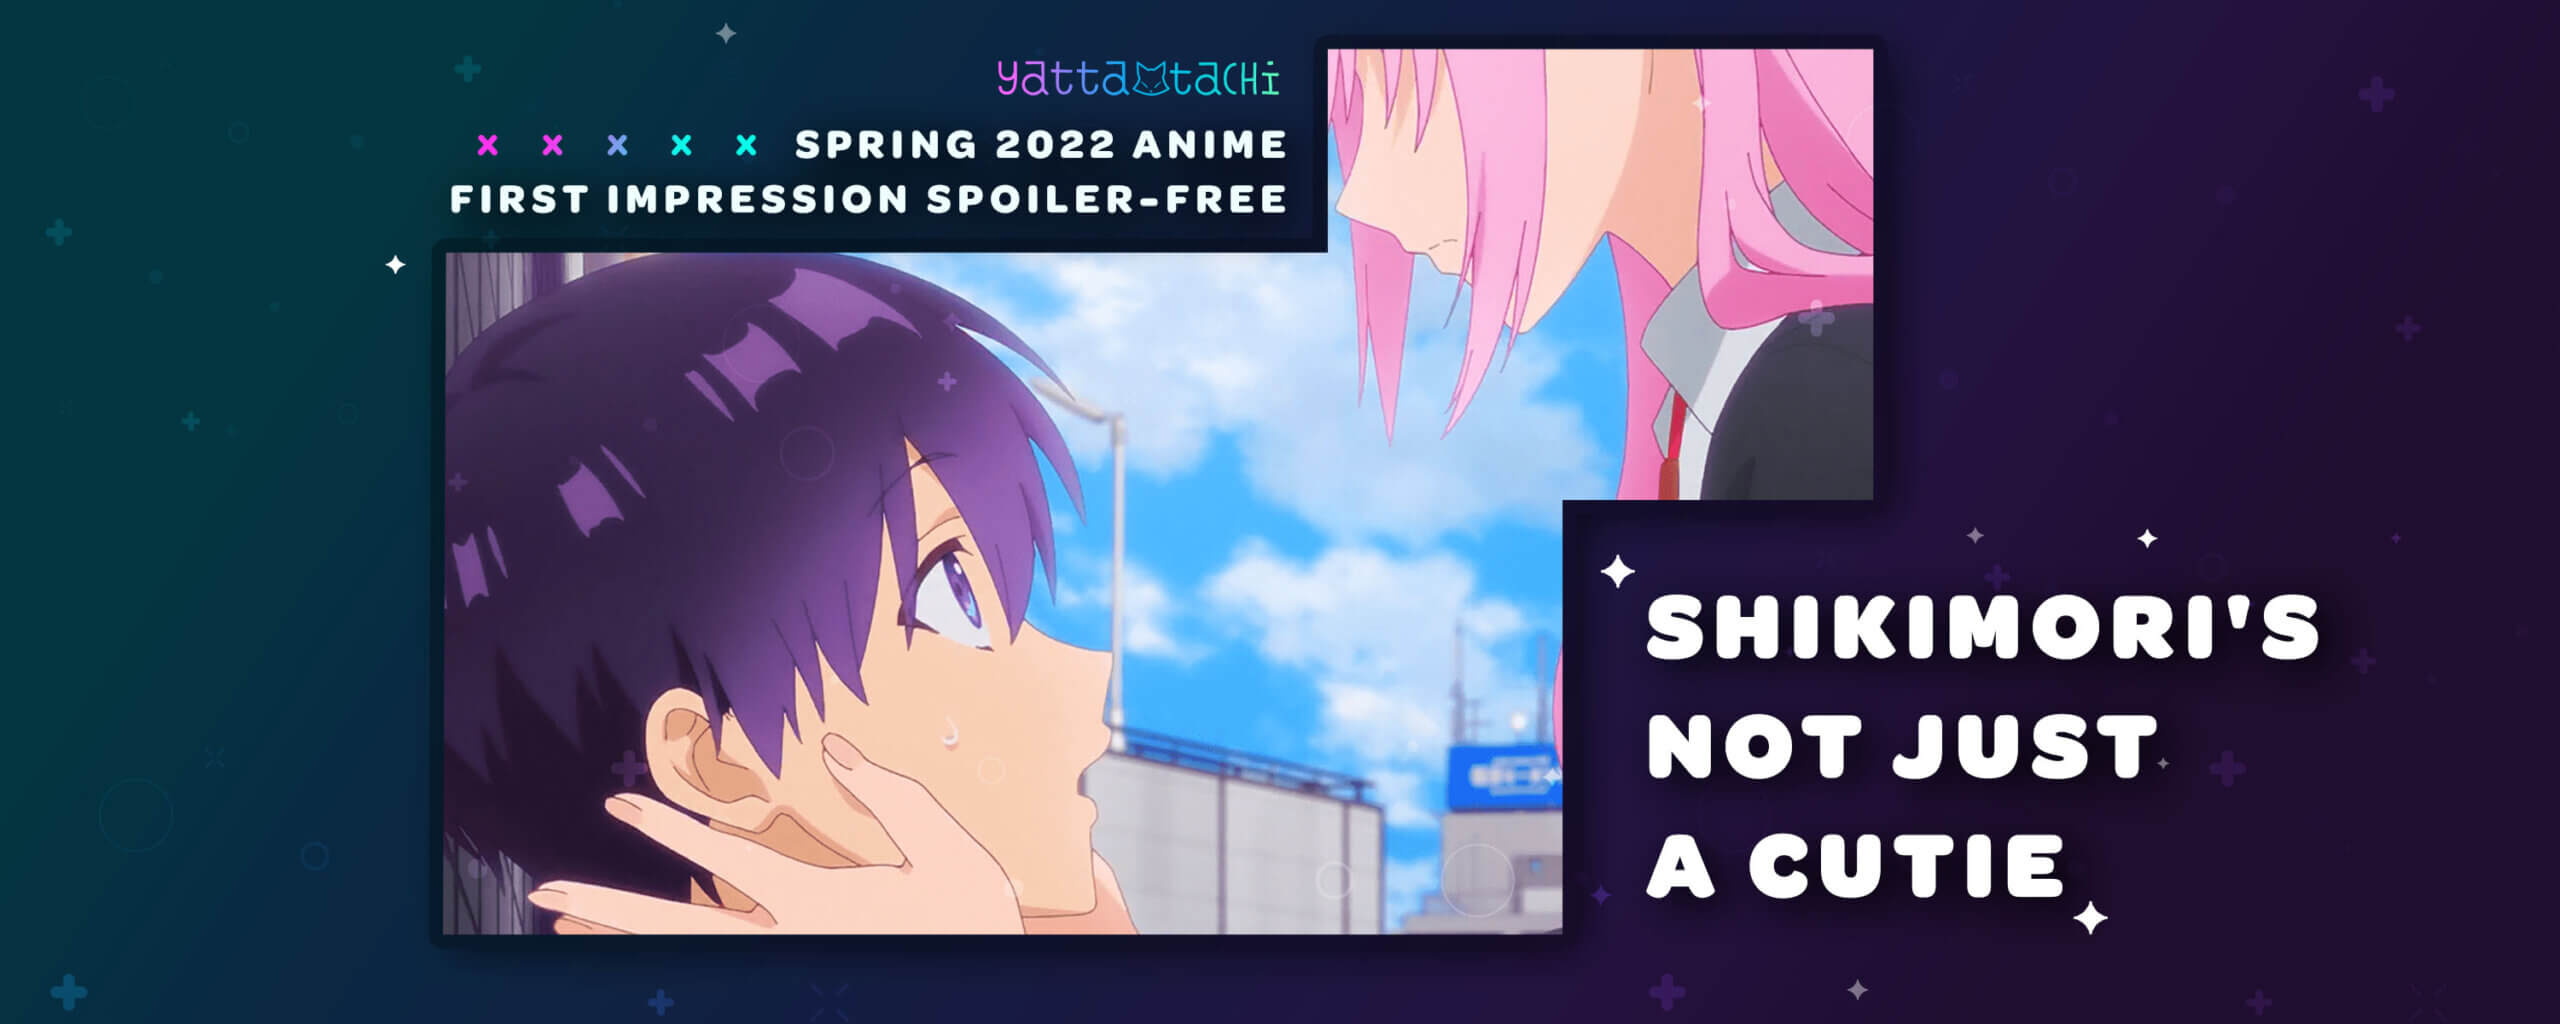 What Are We Watching? Summer Anime 2022 | The A7 Podcast #26 – Advent Seven